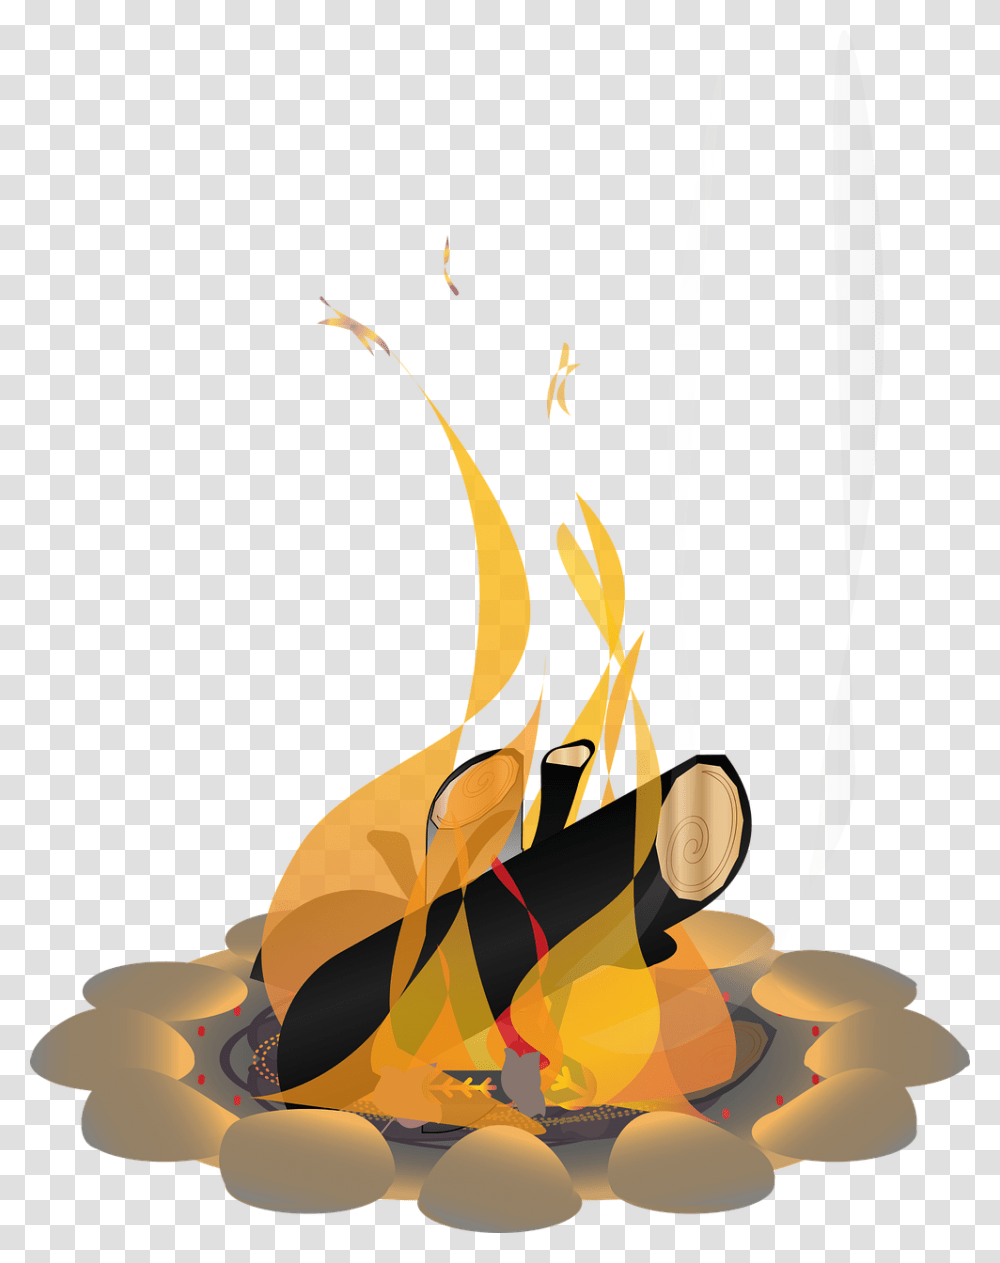 Graphic Campfire Fire Free Vector Graphic On Pixabay Campfire, Bird, Animal, Graphics, Art Transparent Png